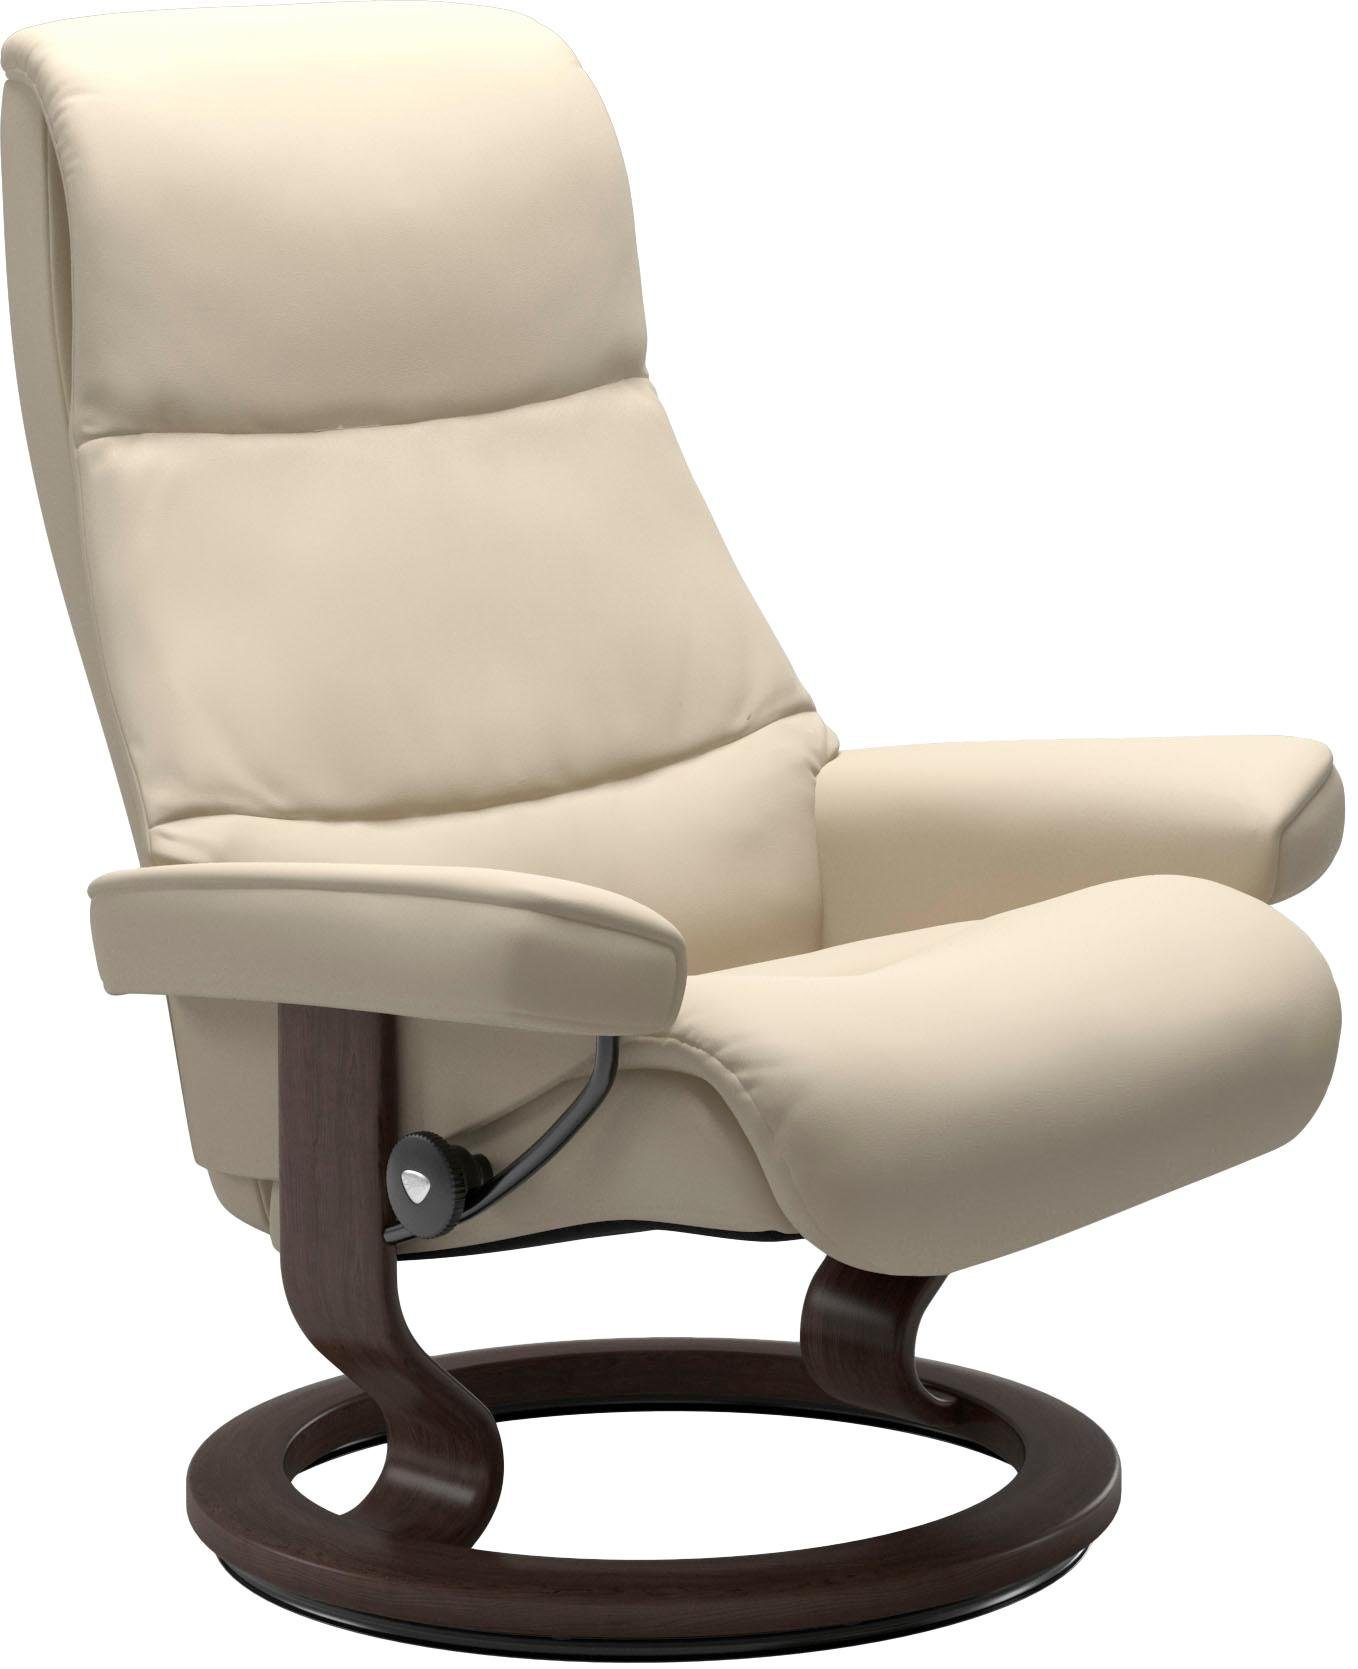 Base, Wenge View, M,Gestell mit Relaxsessel Stressless® Classic Größe